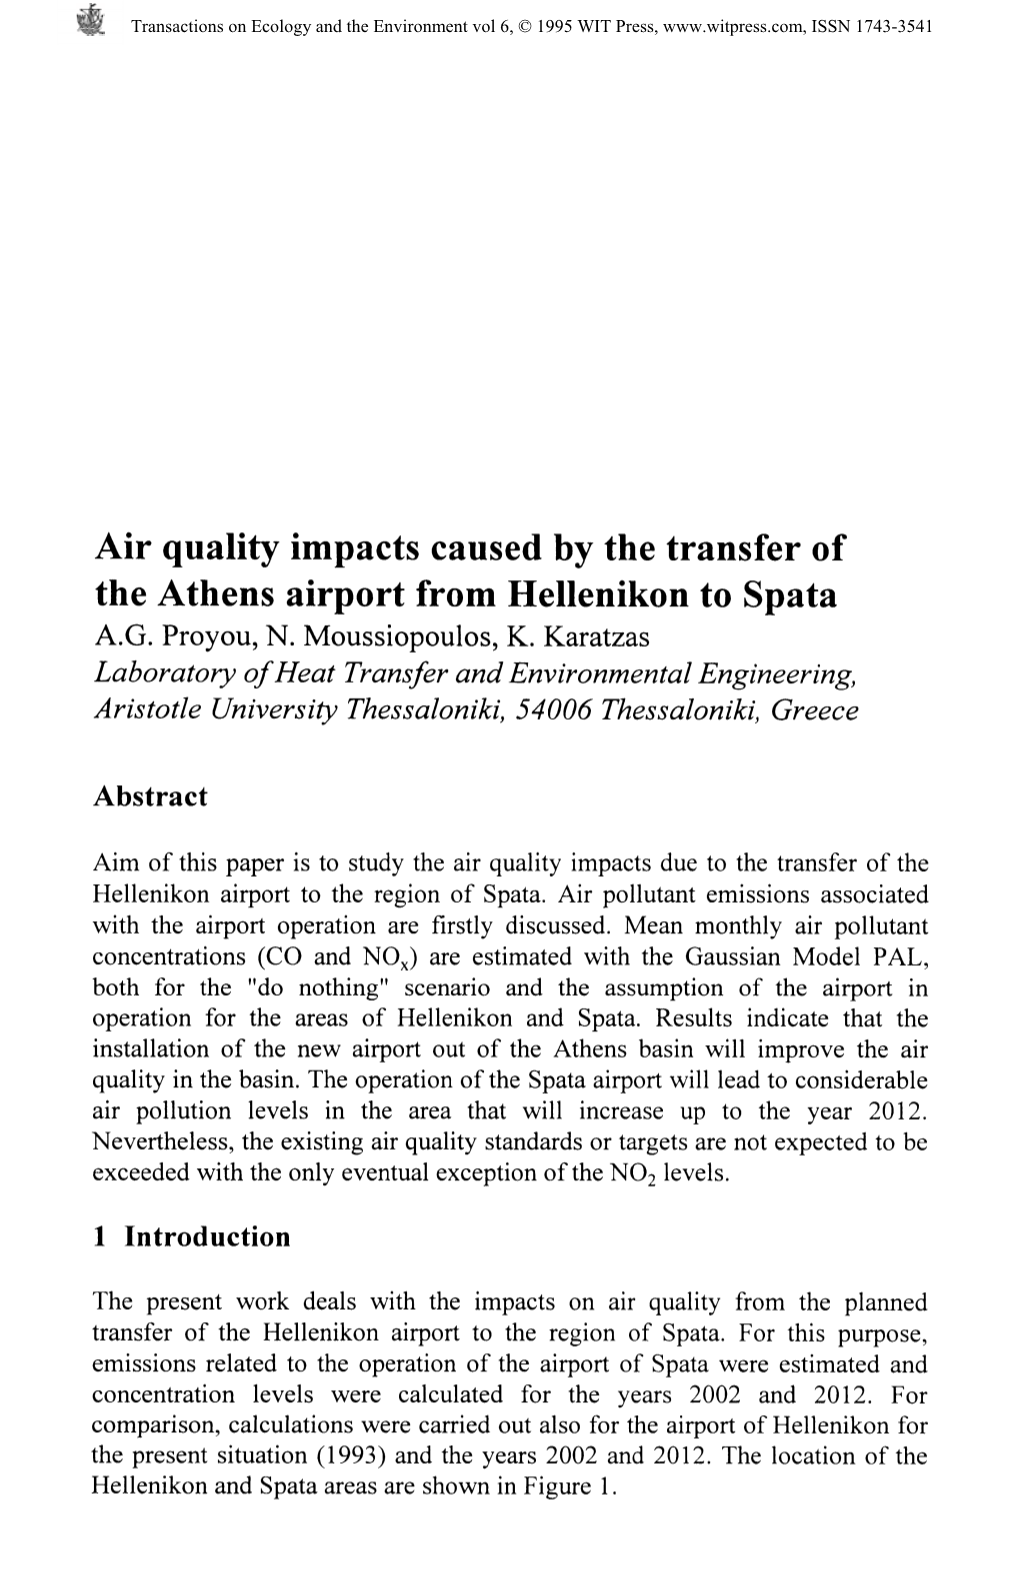 Air Quality Impacts Caused by the Transfer of the Athens Airport from Hellenikon to Spata A.G